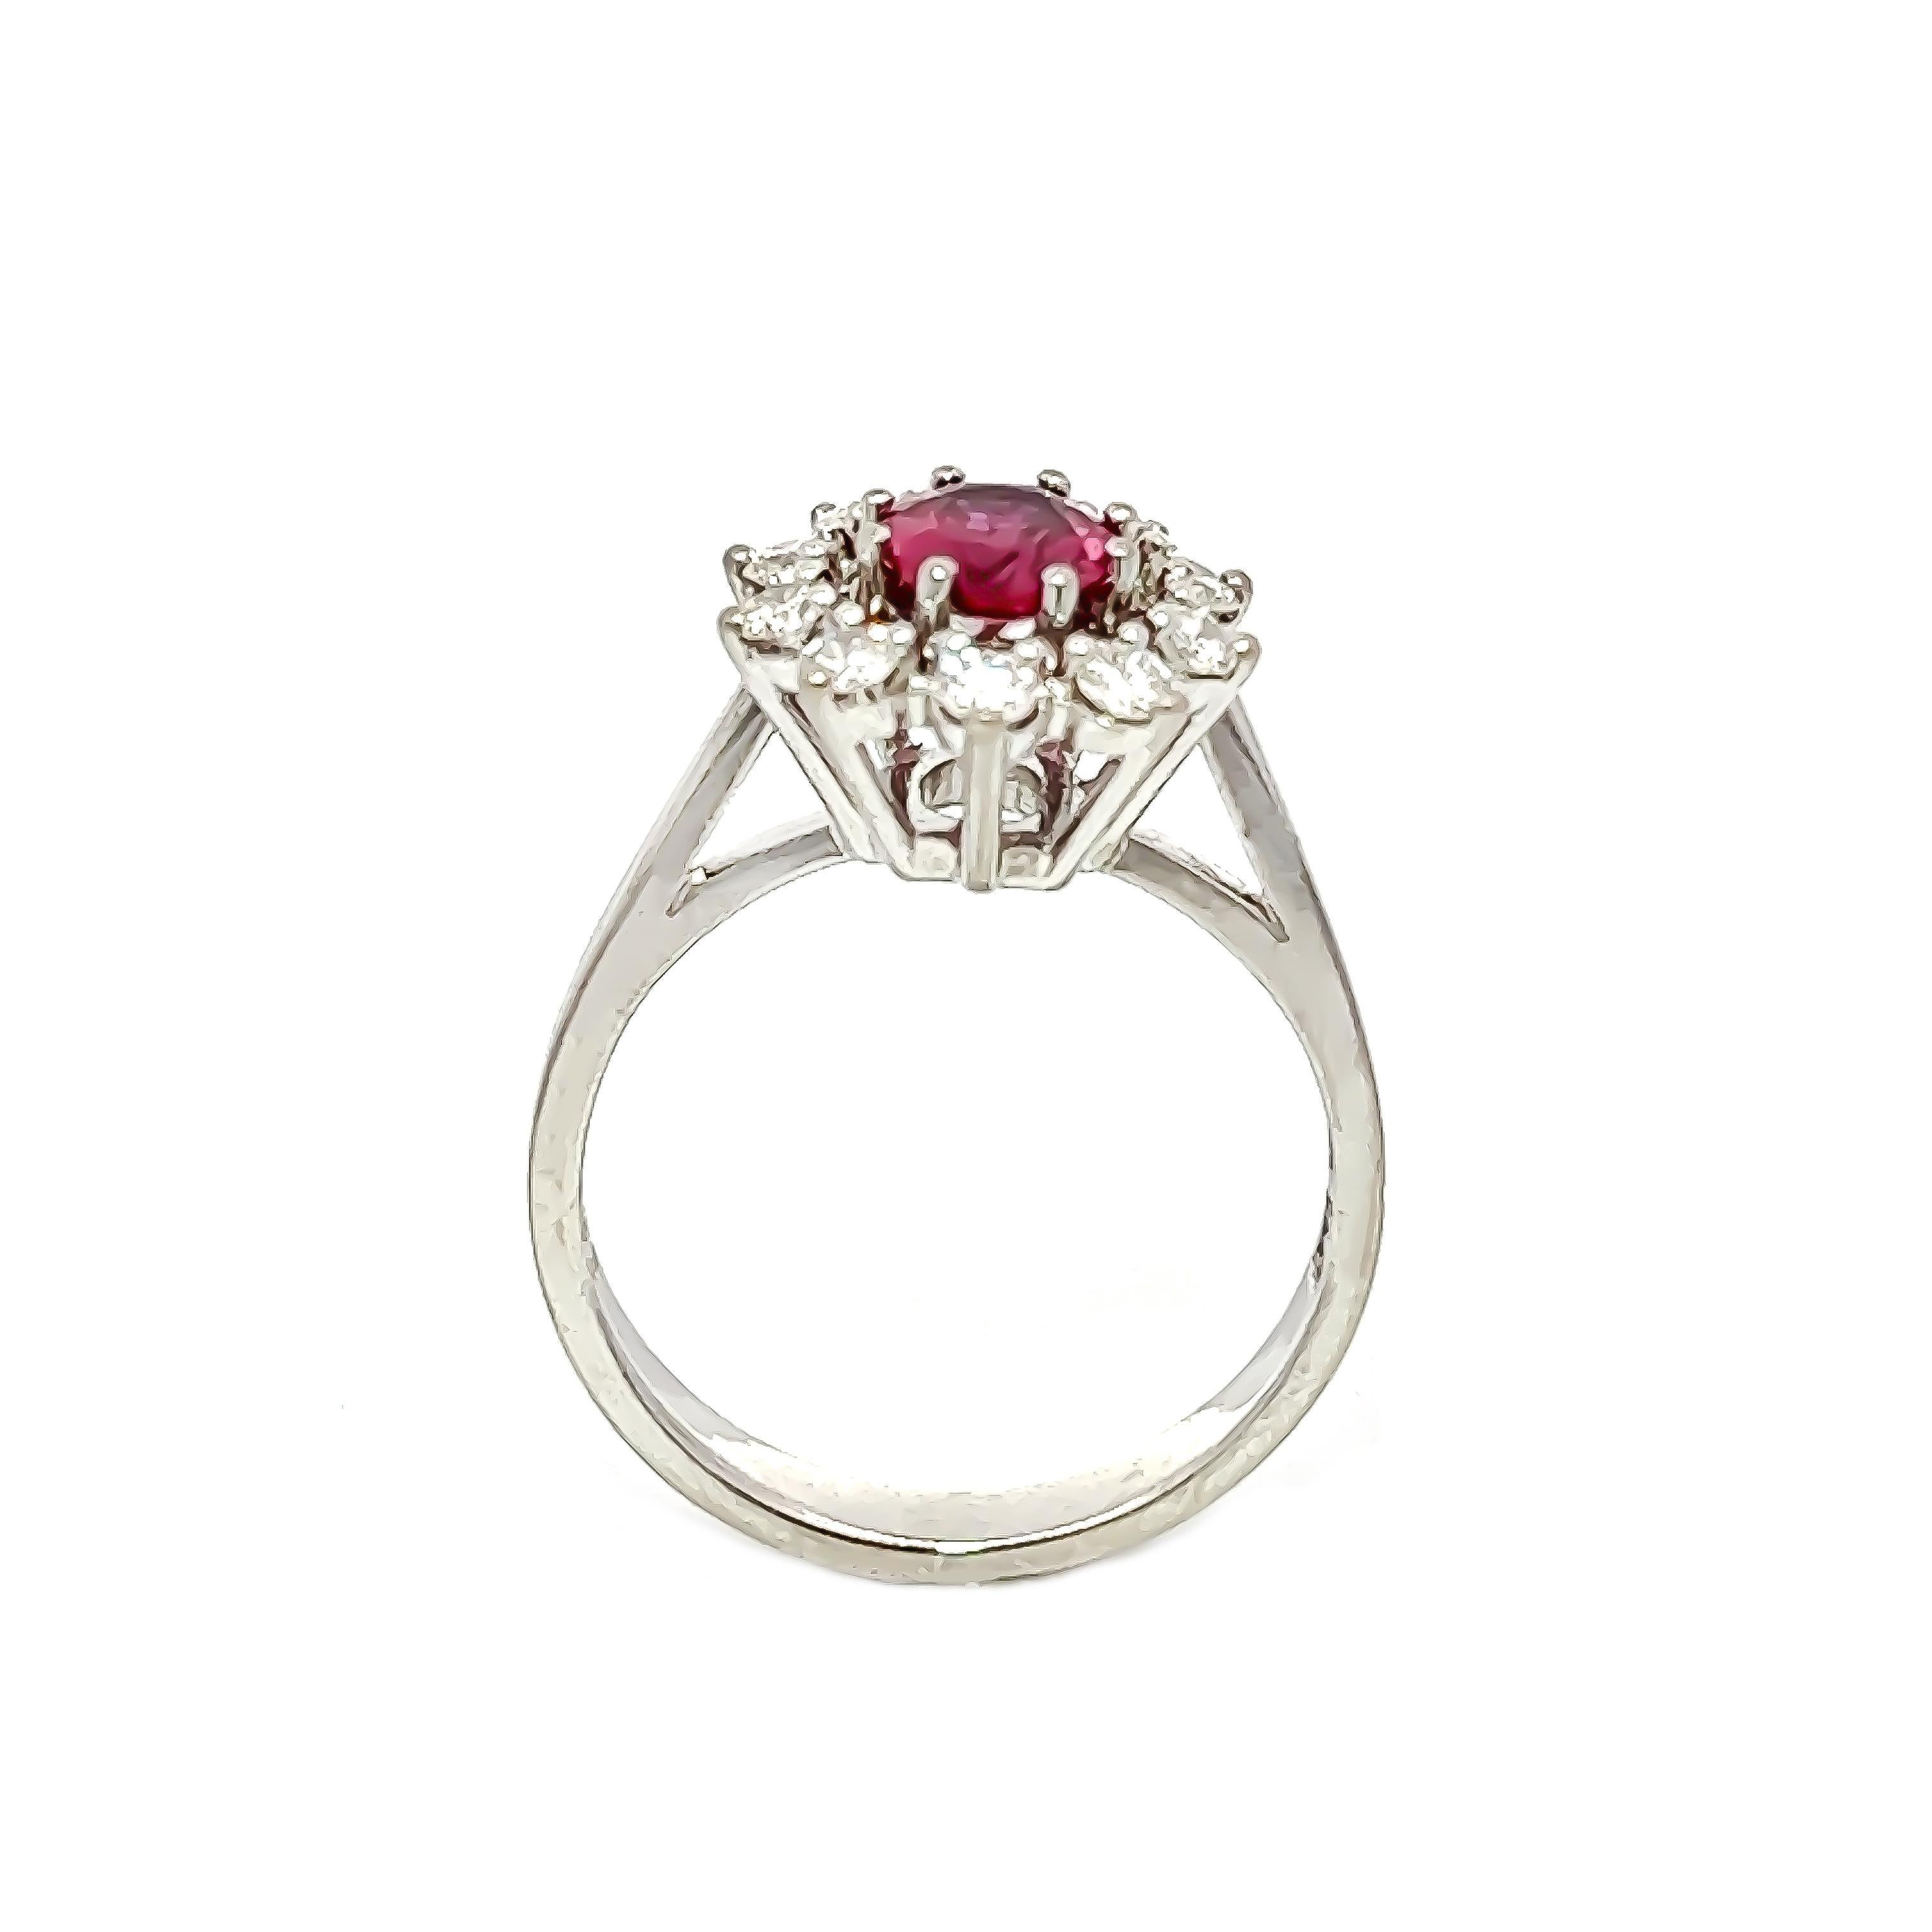 The stunning 18K white gold bandicent 0.33CT ruby at its center, elegantly encircled by 0.30CT of sparkling diamonds. boasts a magnif